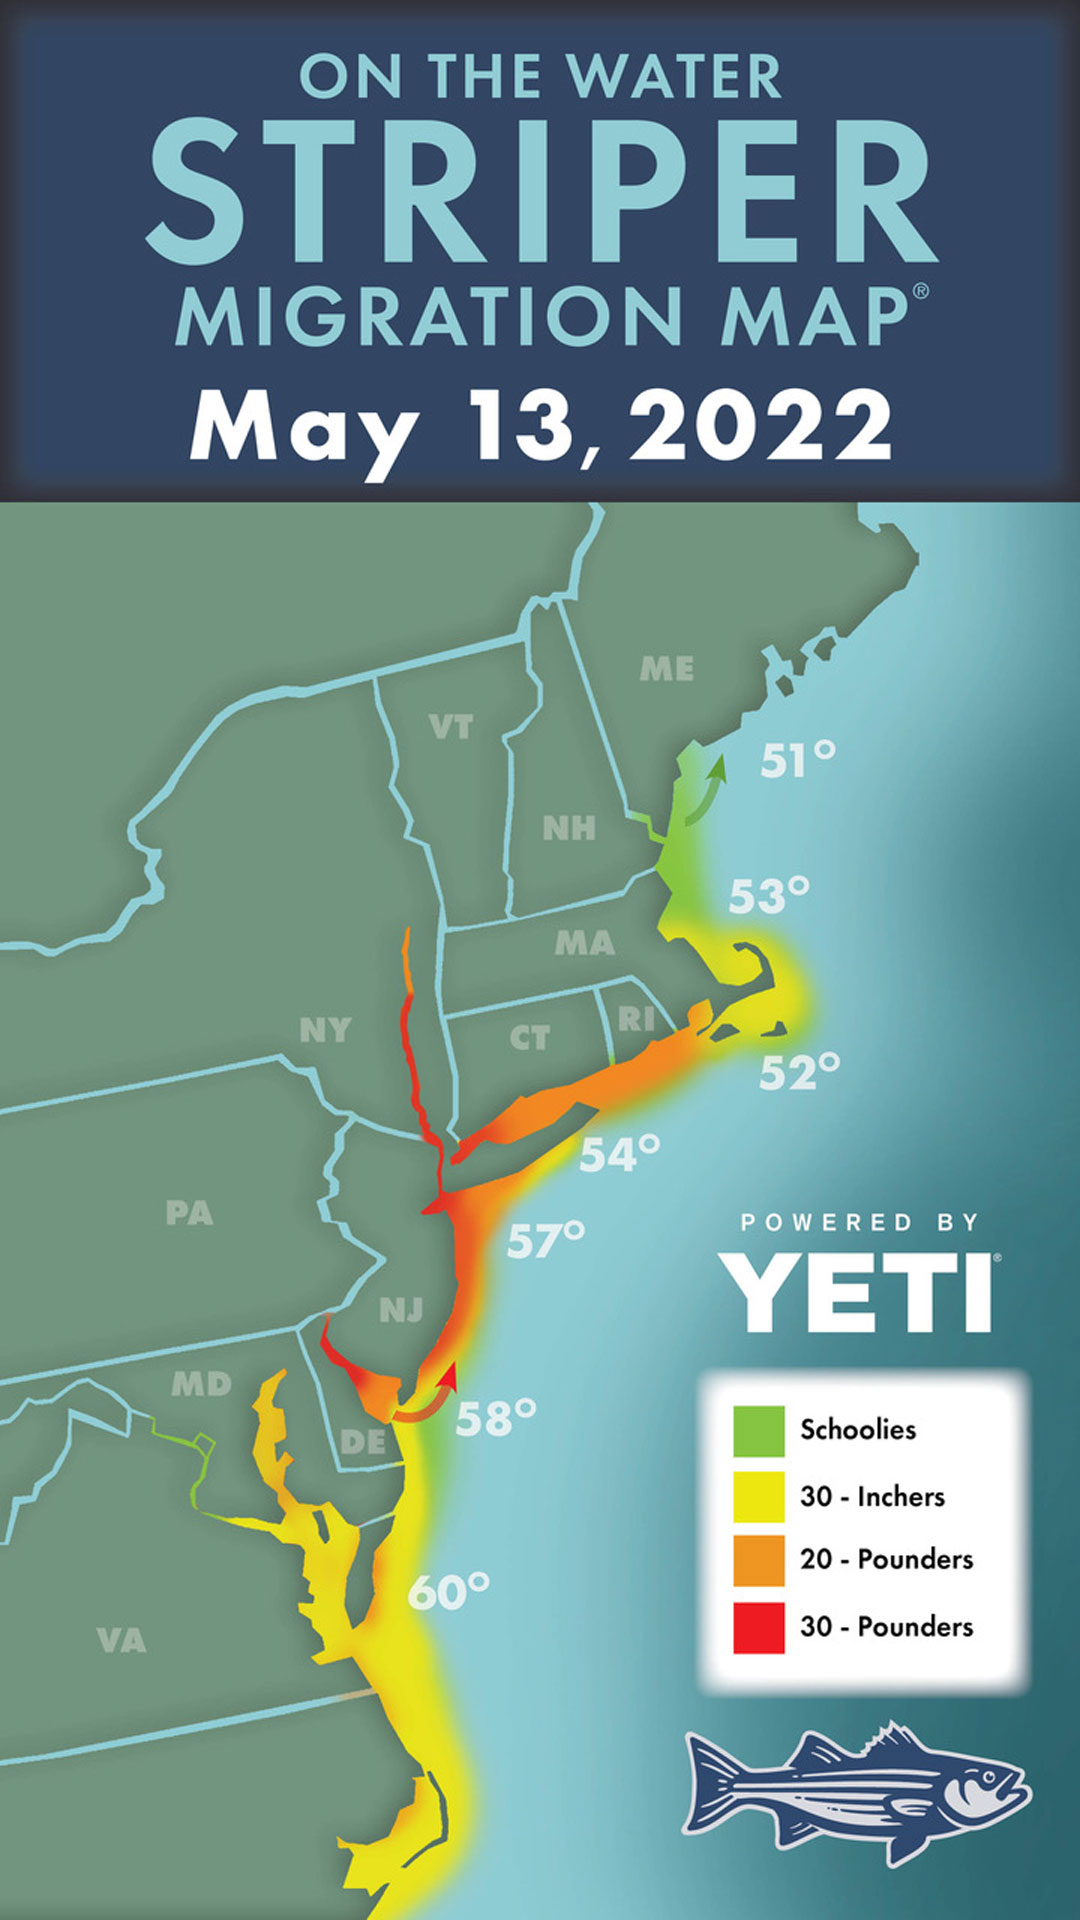 Striper Migration Map – May 13, 2022